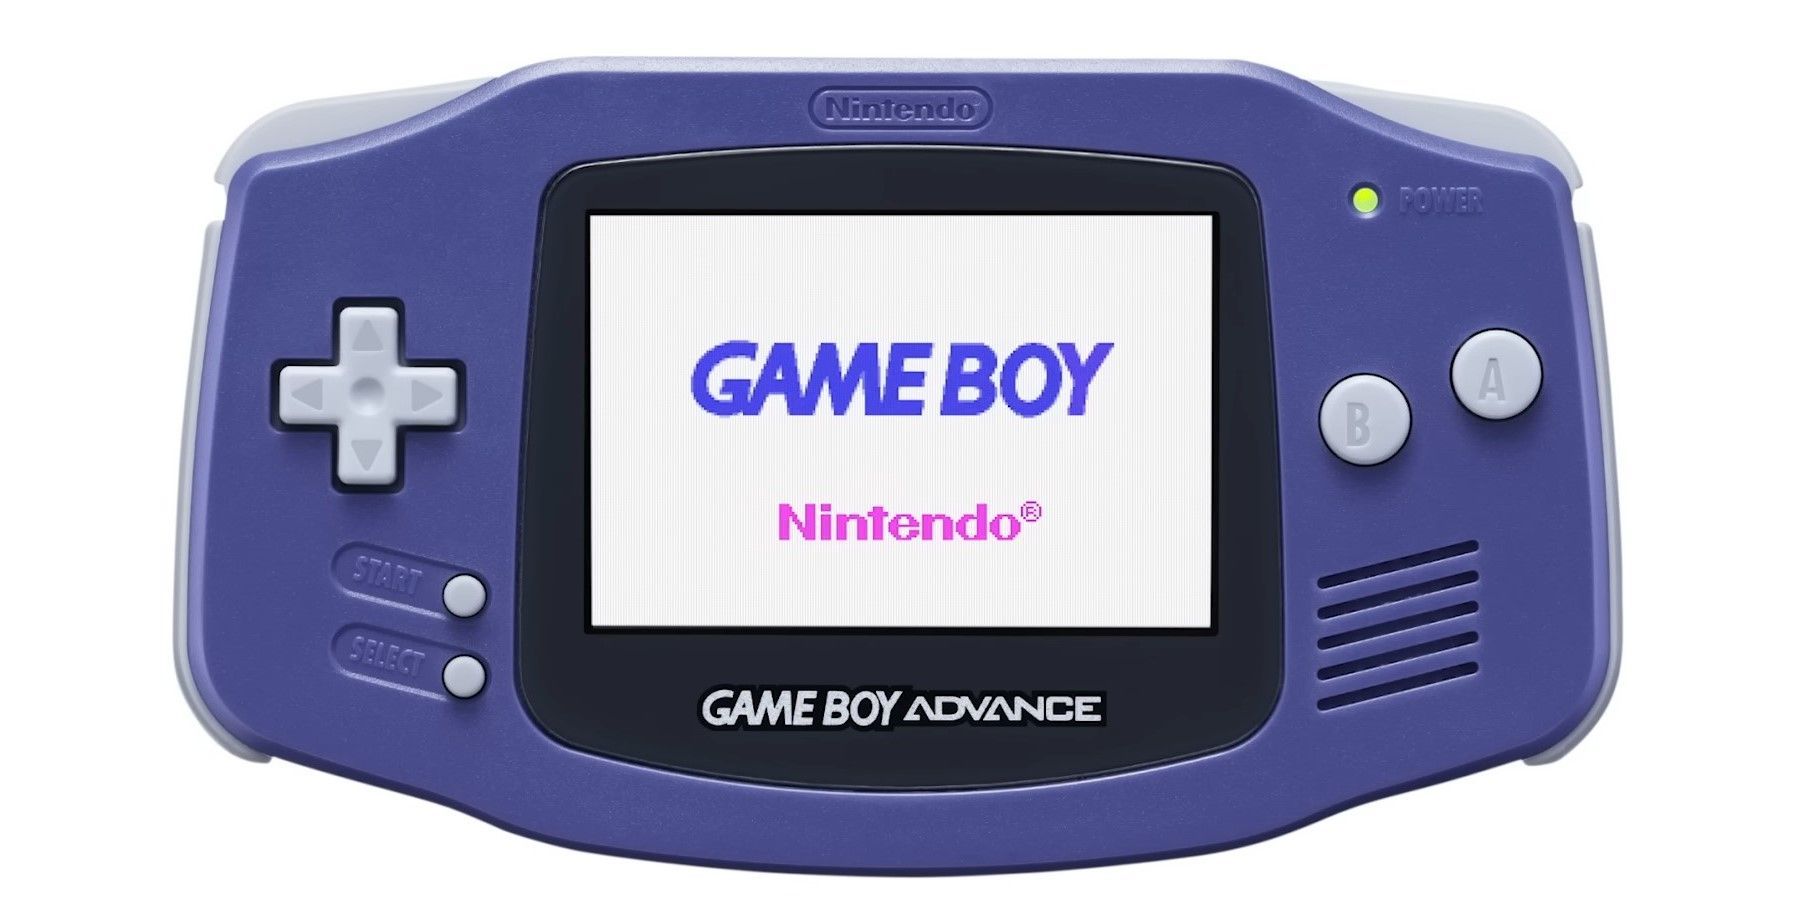 13 Best GBA ROMs for Free (GameBoy Advance) - Stealthy Gaming